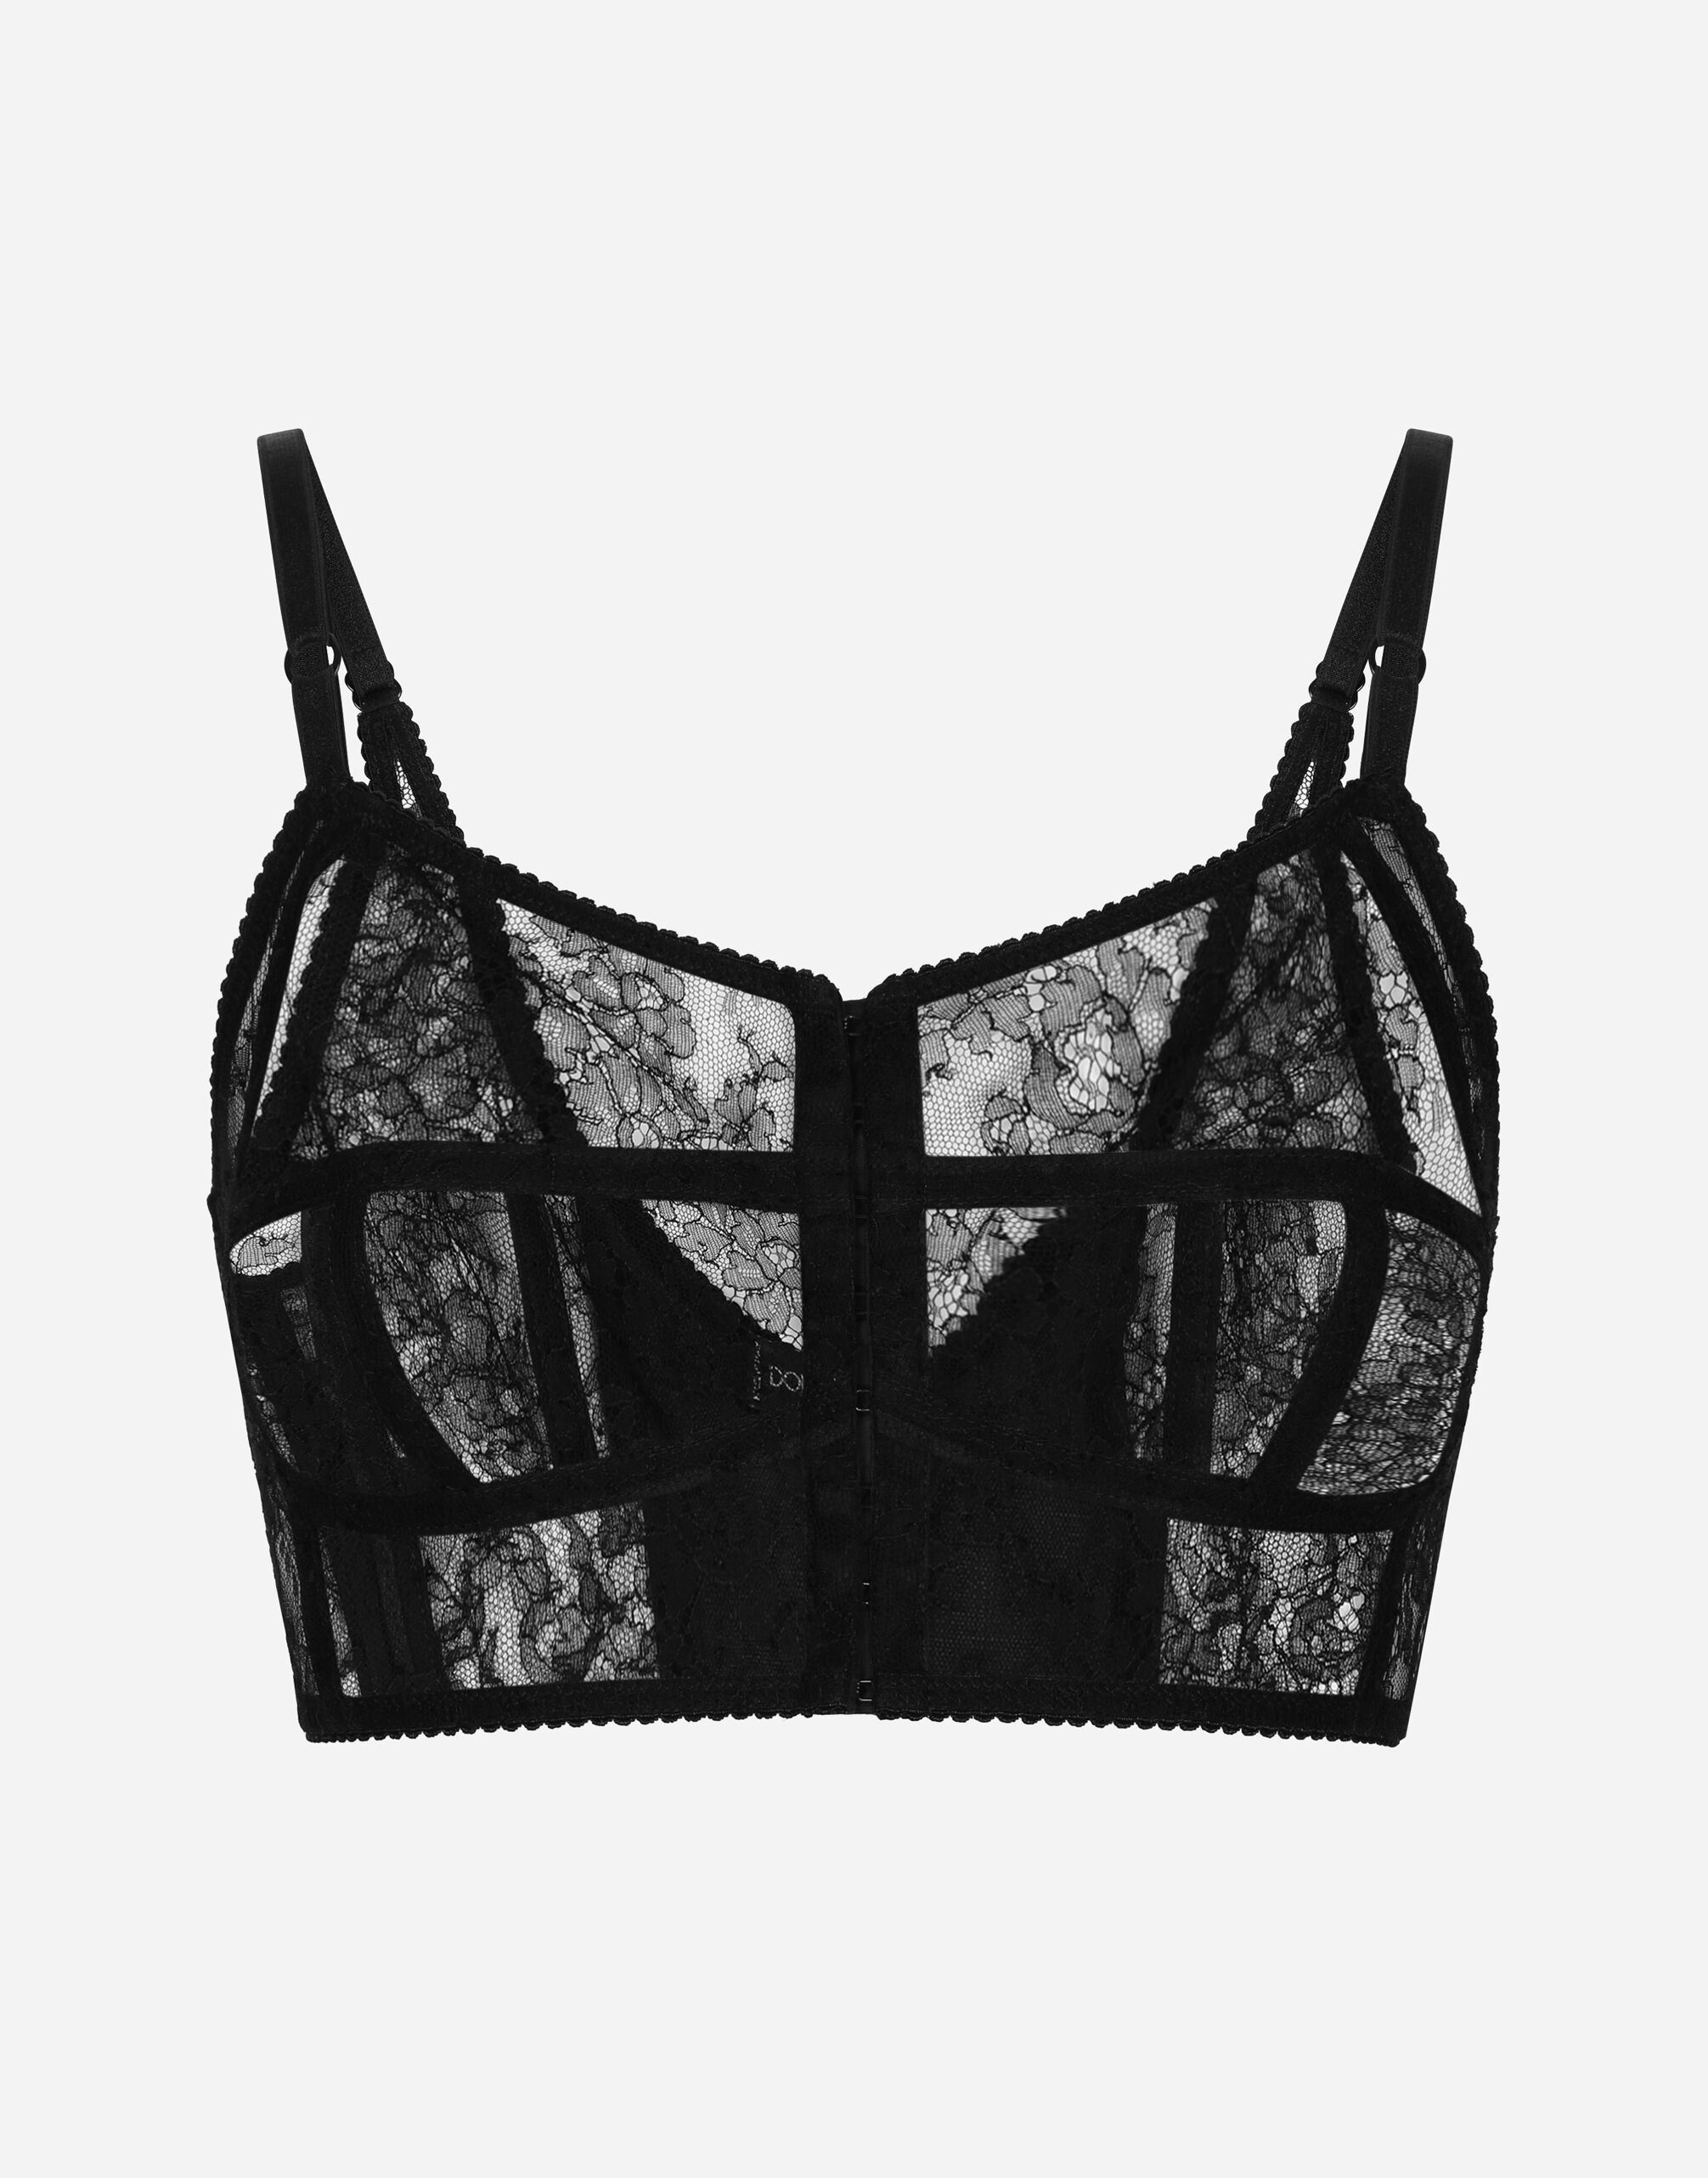 Dolce & Gabbana Lace lingerie bustier with straps Print O1A12TON00R